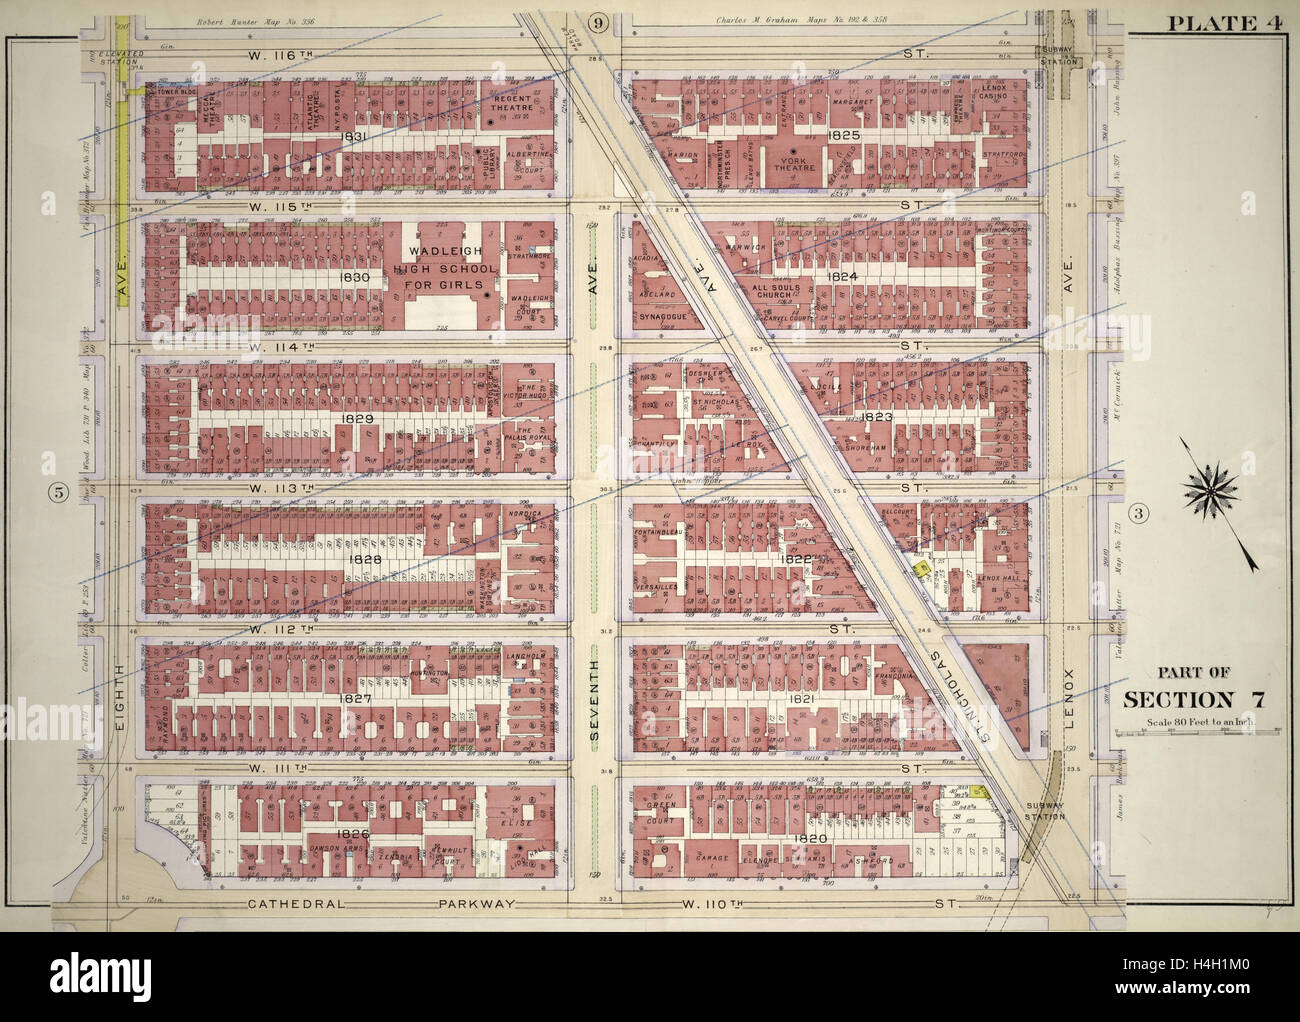 Plate 4: Part of Section 7, New York, USA Stock Photo